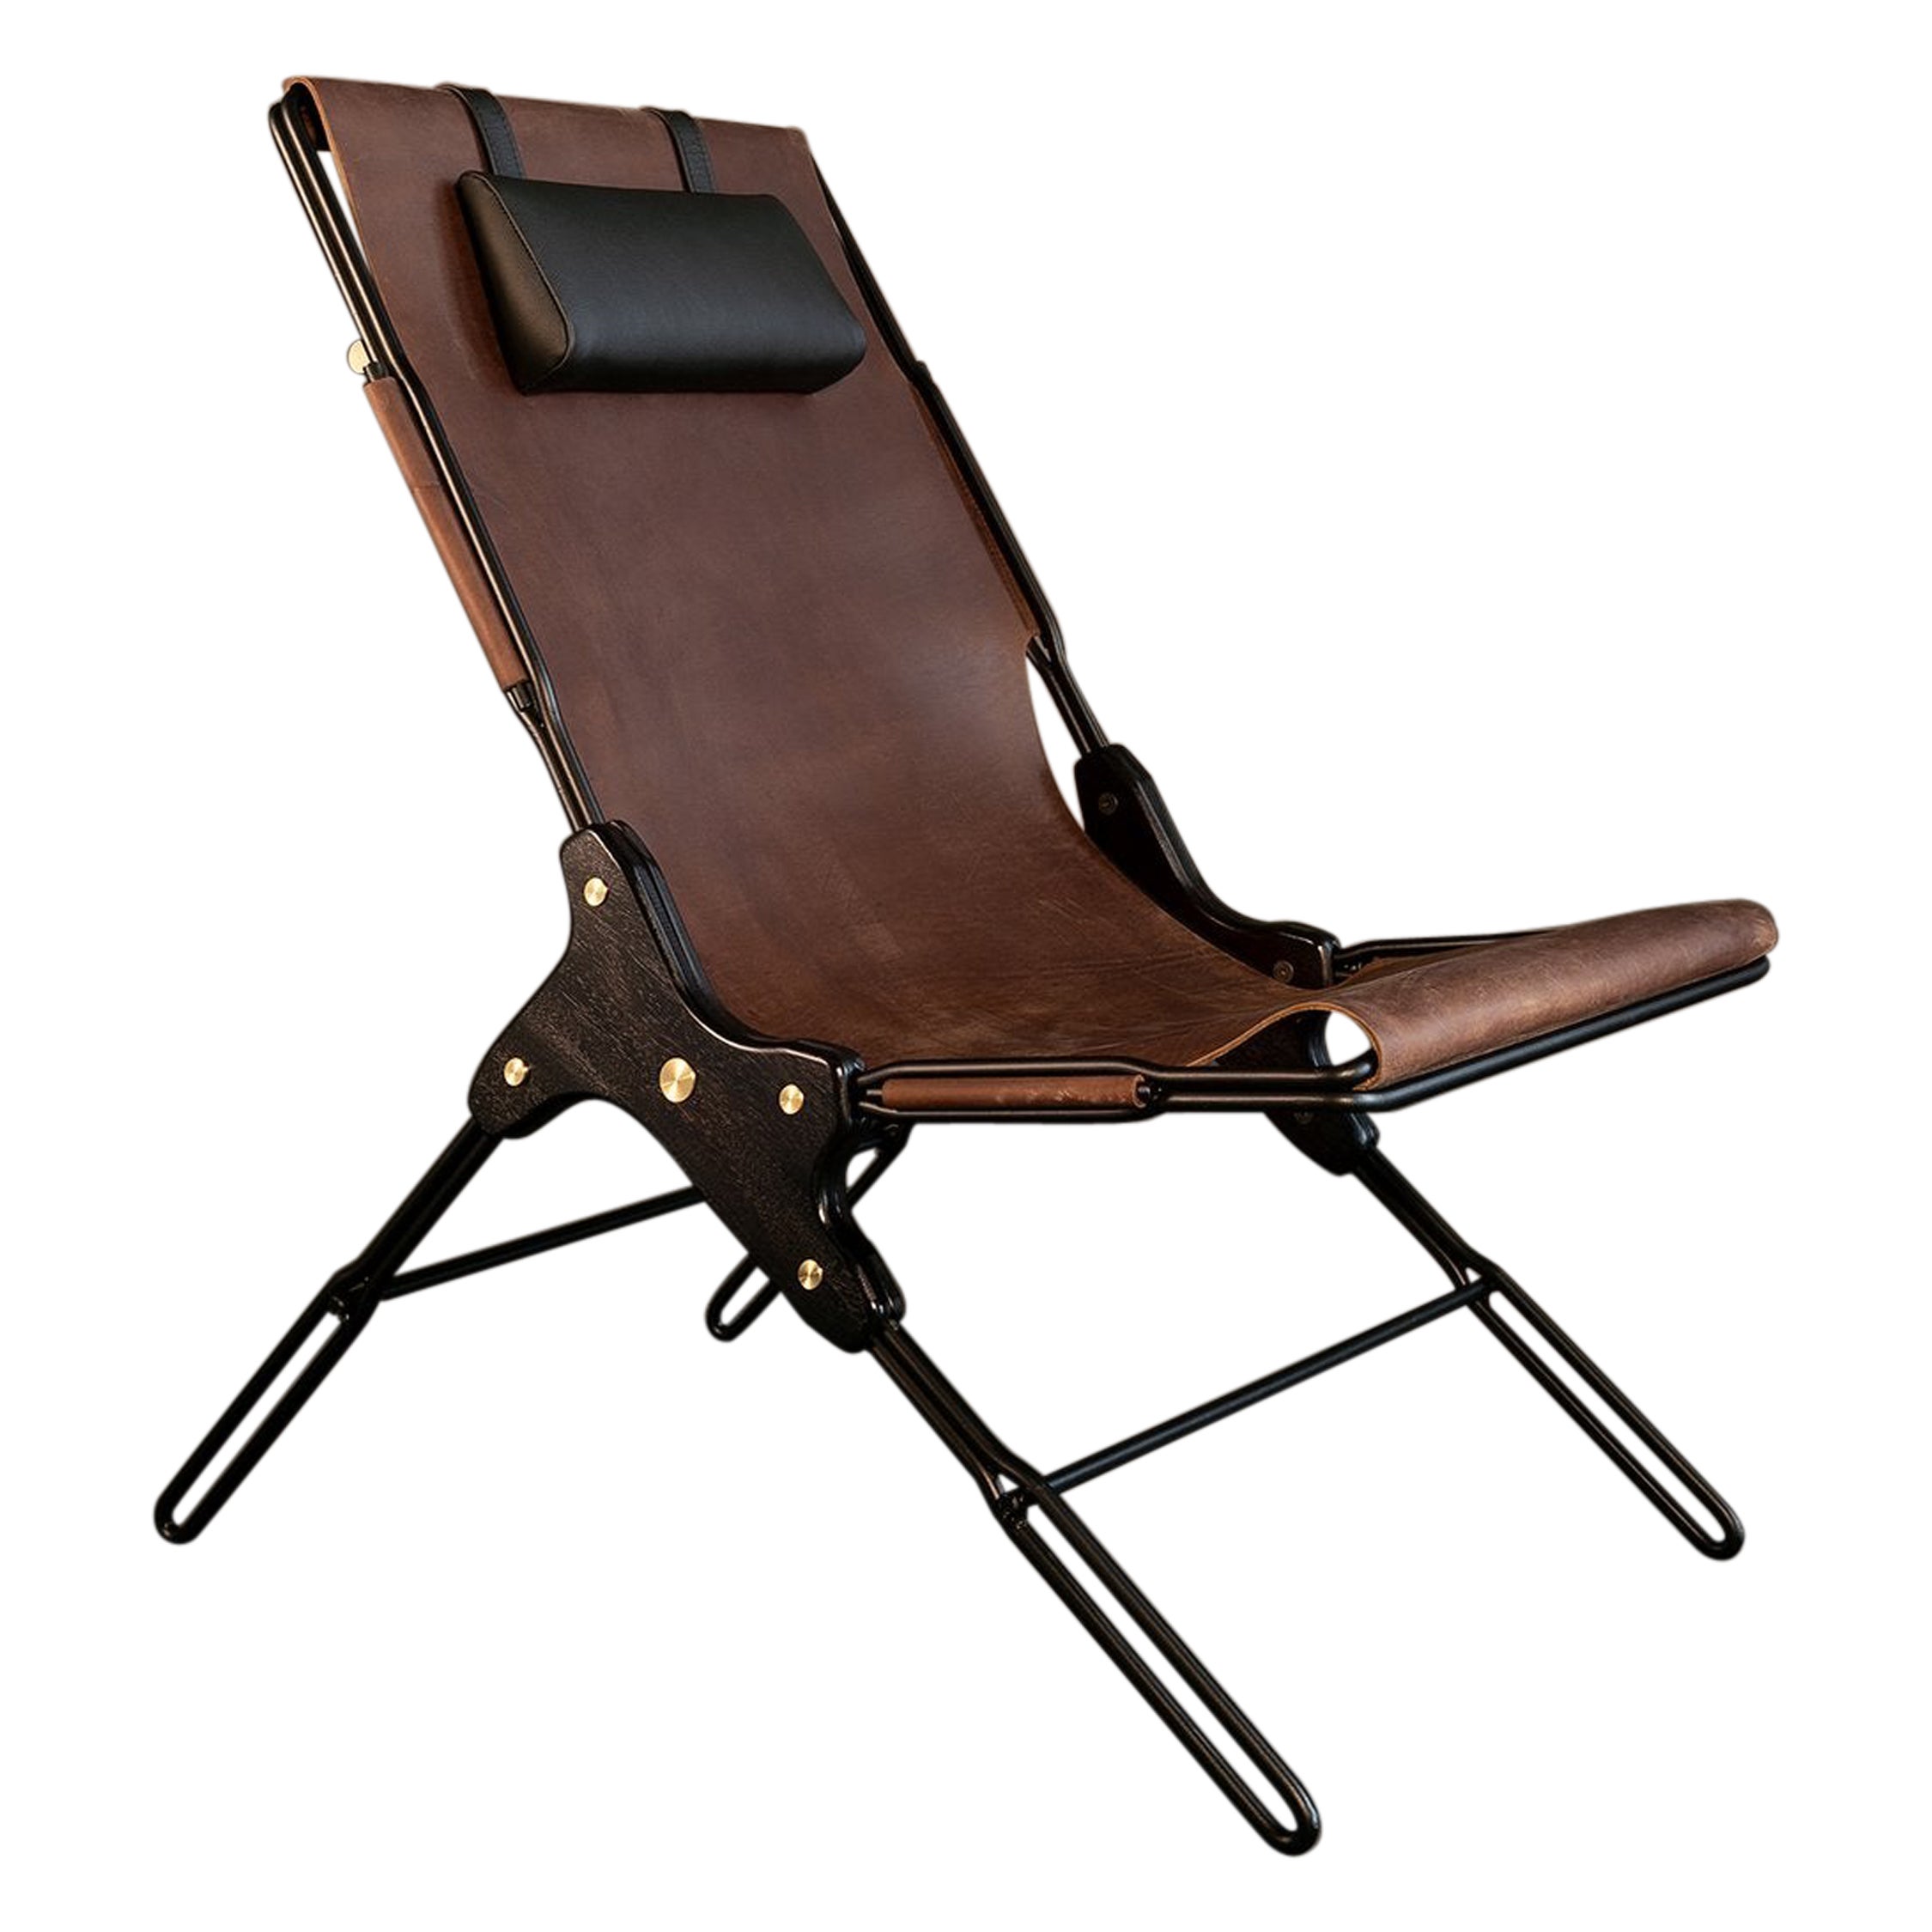 Perfidia_01 Lounge Chair Brown by ANDEAN, REP by Tuleste Factory